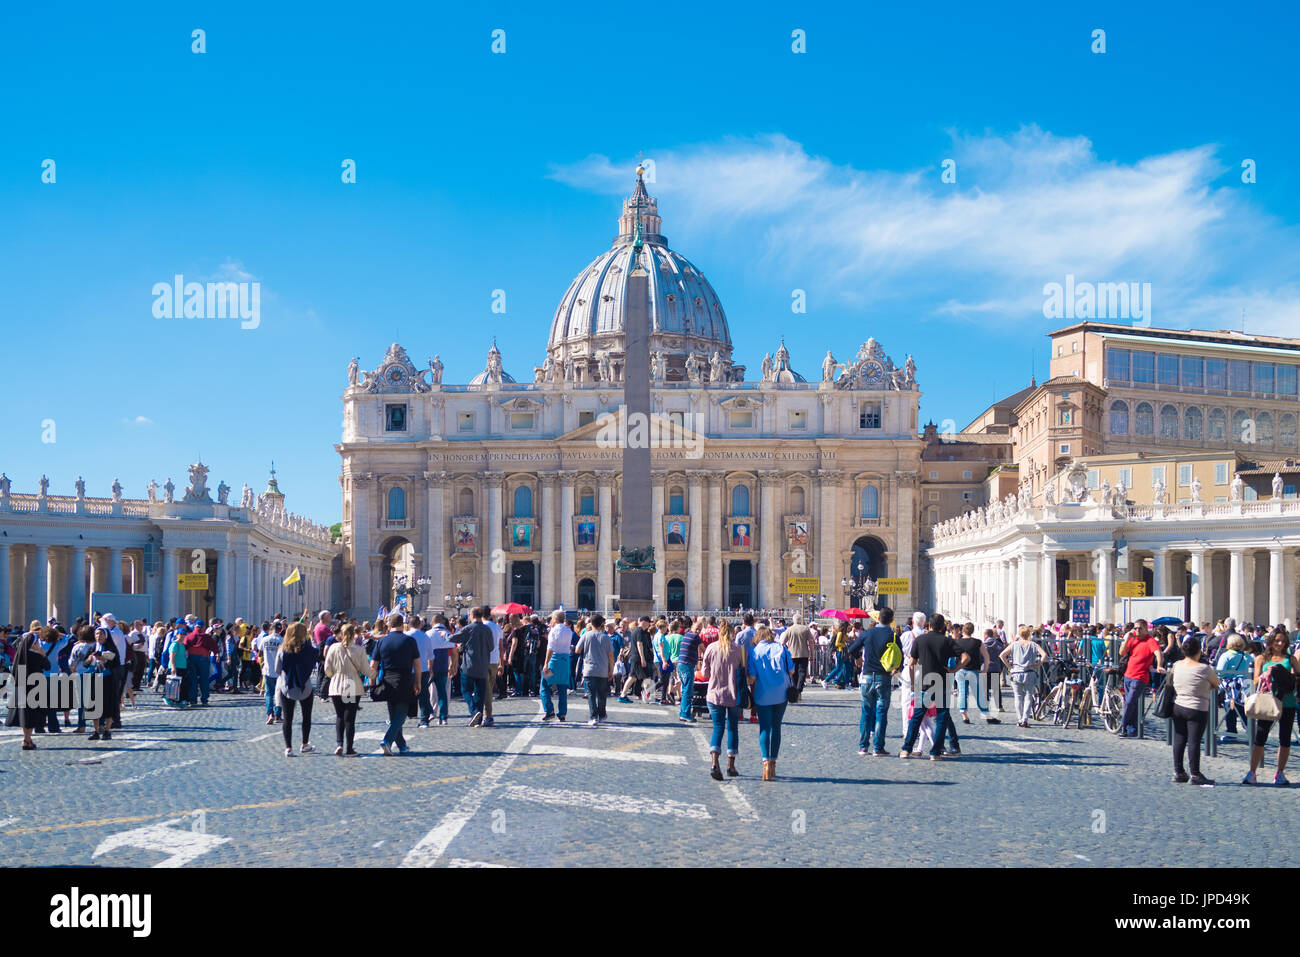 VATICAN CITY, VATICAN - OCTOBER 16, 2016: tourists at the famous saint peter's square in front of the Basilica di san pietro Stock Photo